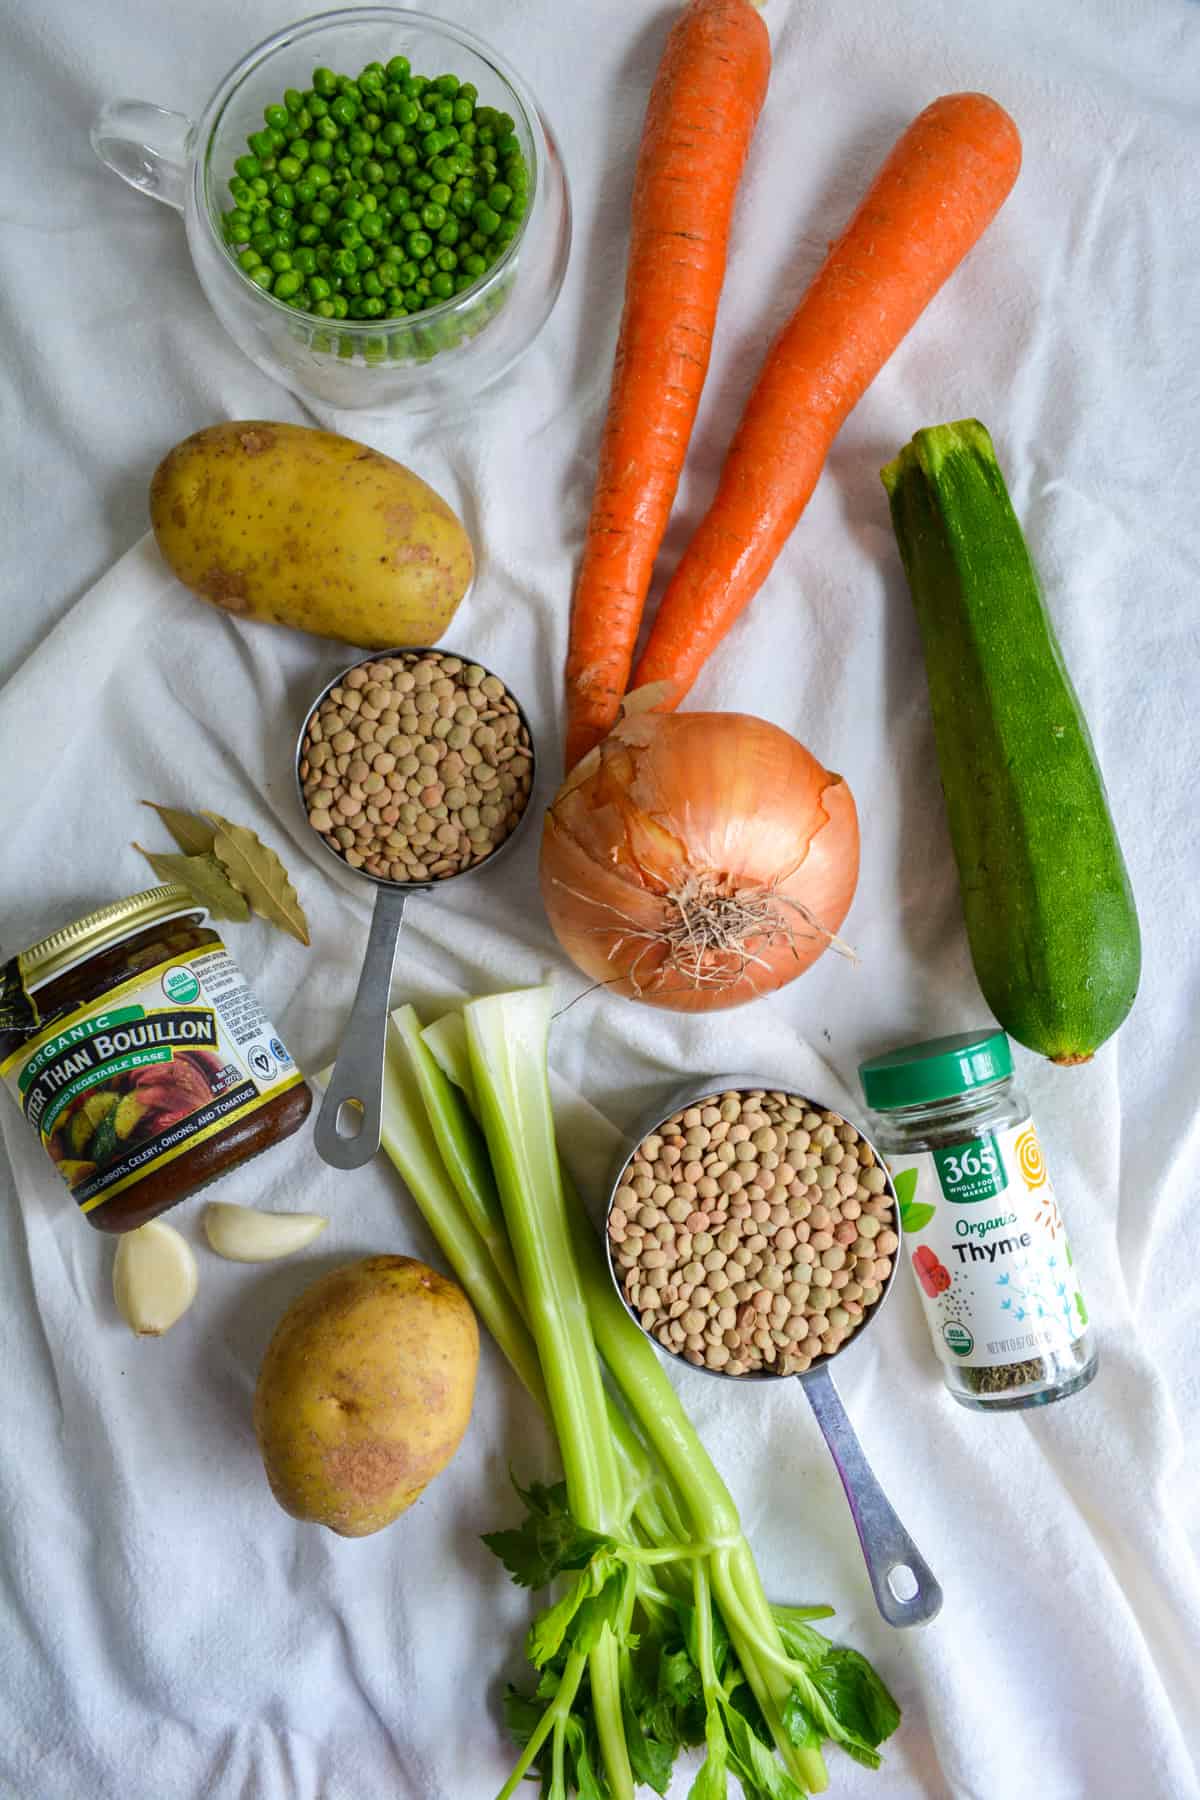 Overhead shot of celery, two carrots, vegetable boullion, lentils, a zucchini, an onion, a cup of peas and a container of thyme.